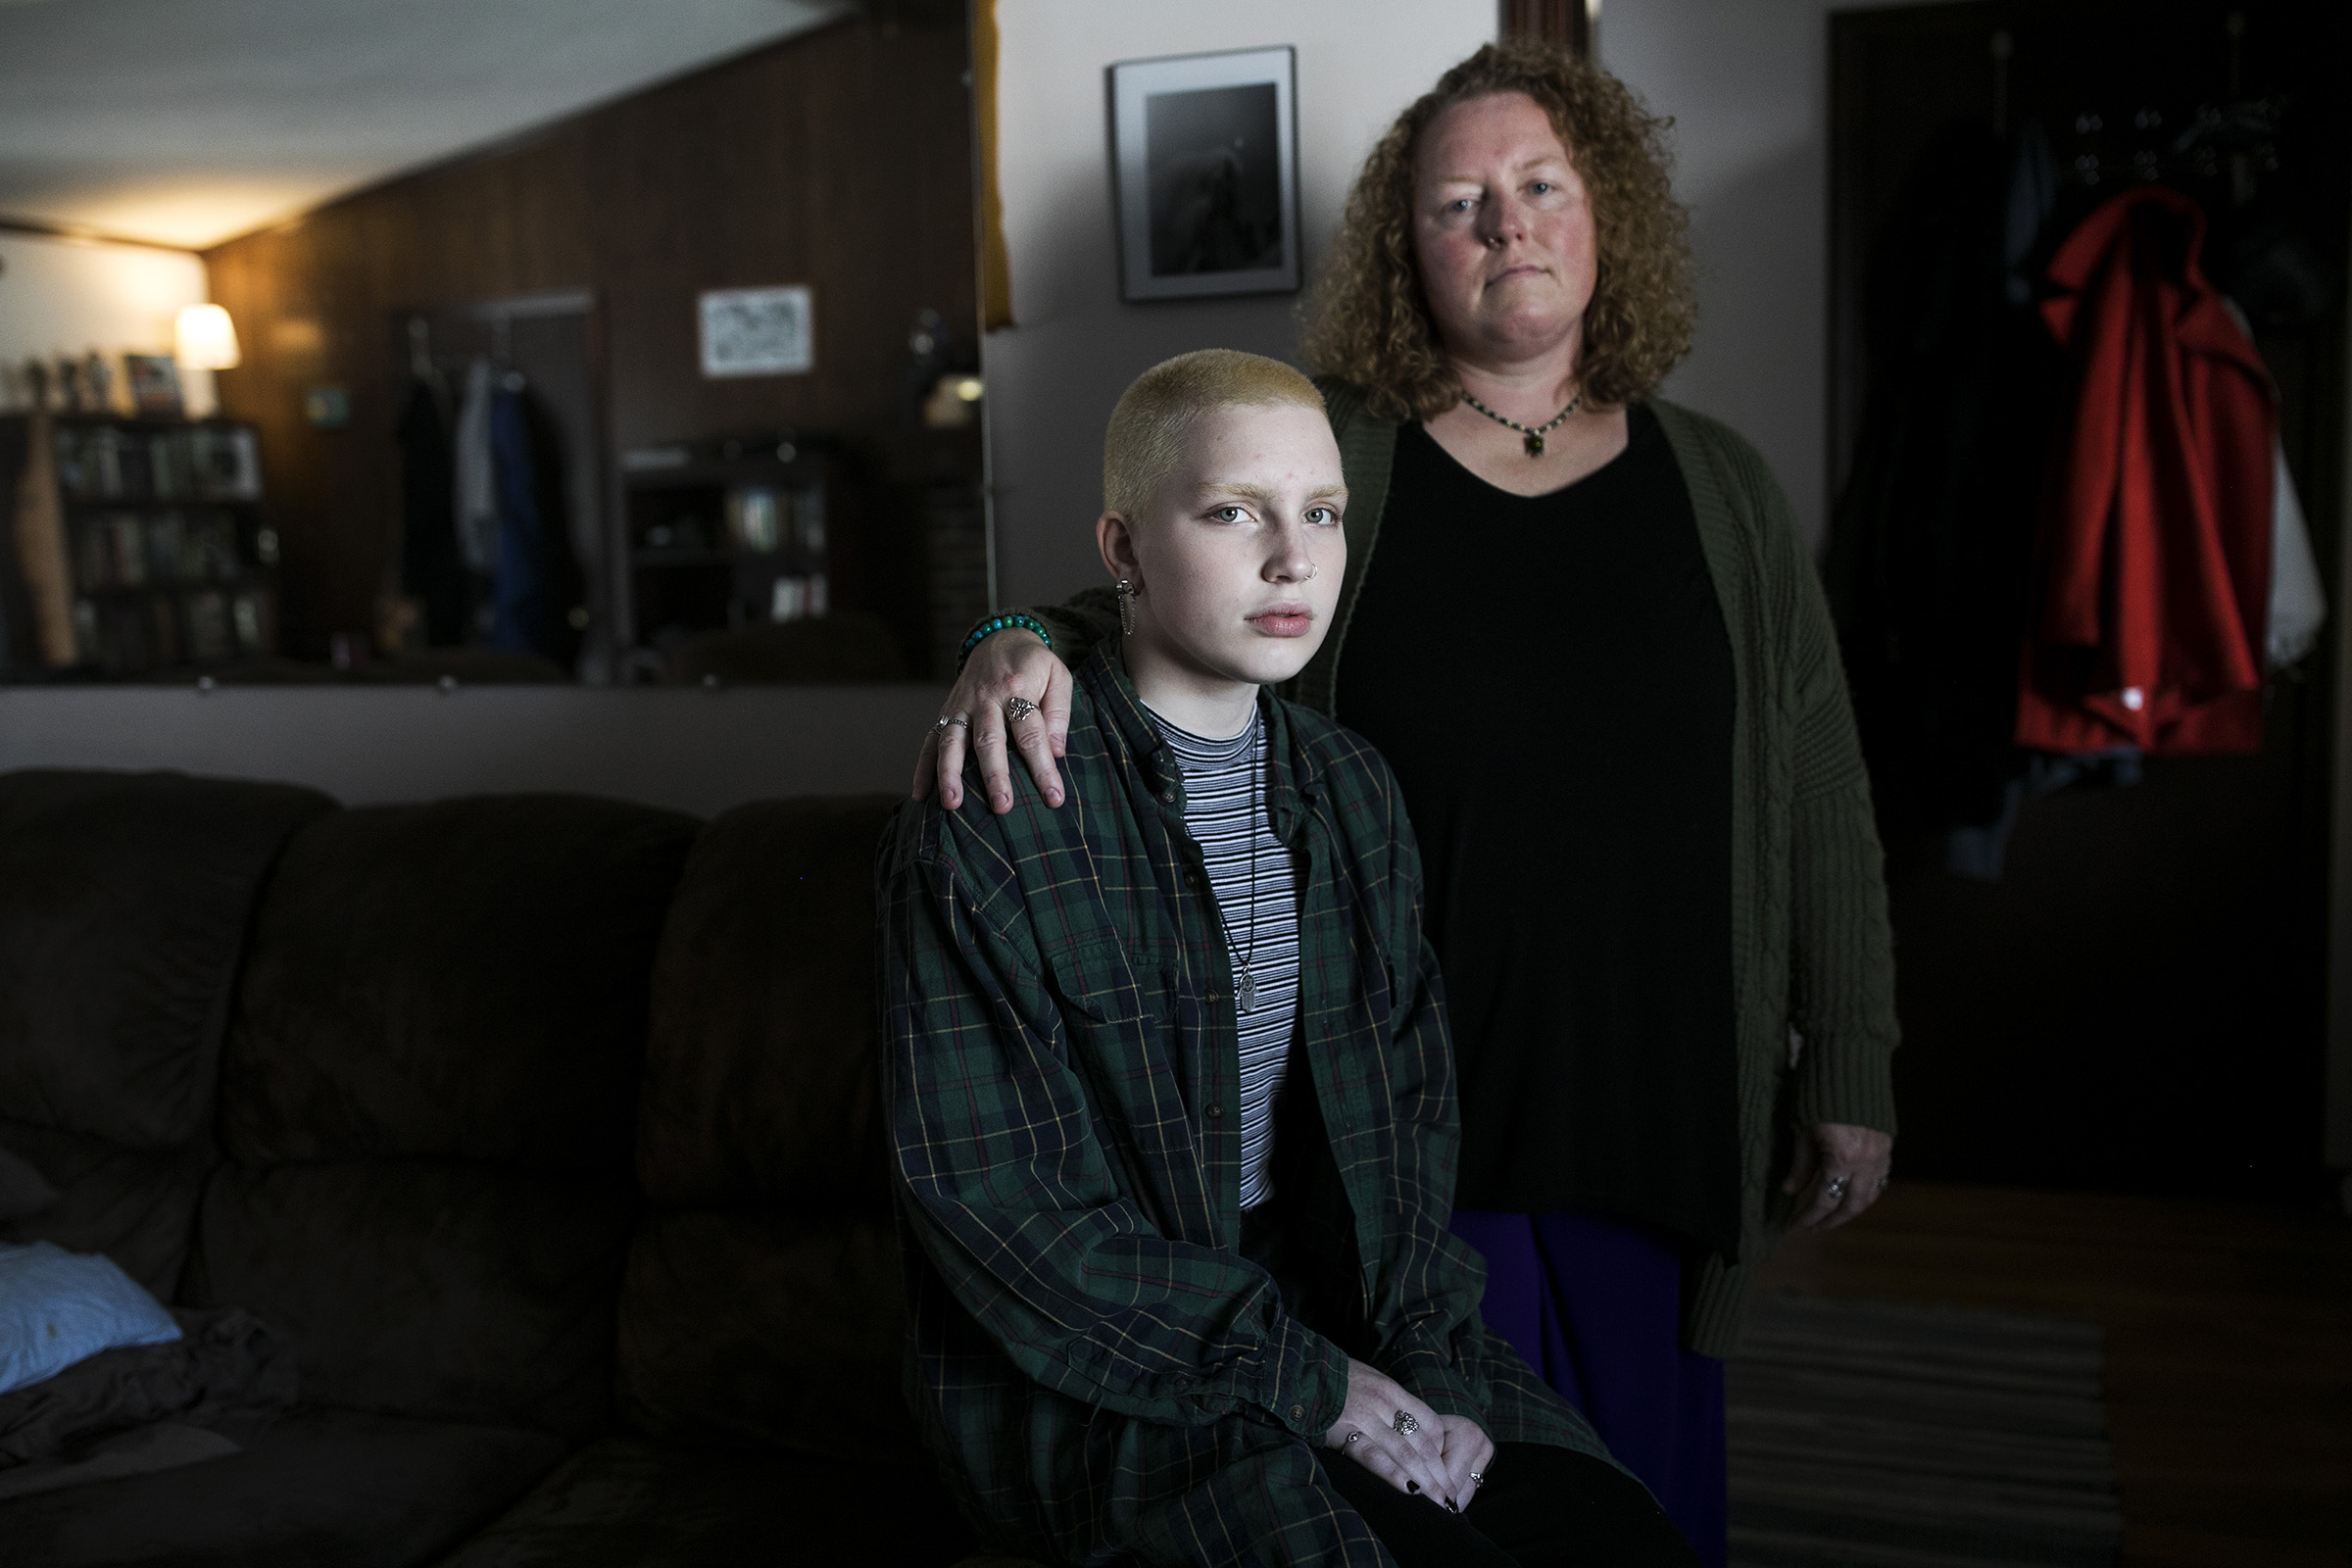 Aidyn Sucec and his mother, Laura Sucec, sit in their home in Brownsburg, Indiana on Nov. 11, 2019. (Maddie McGarvey for TIME)